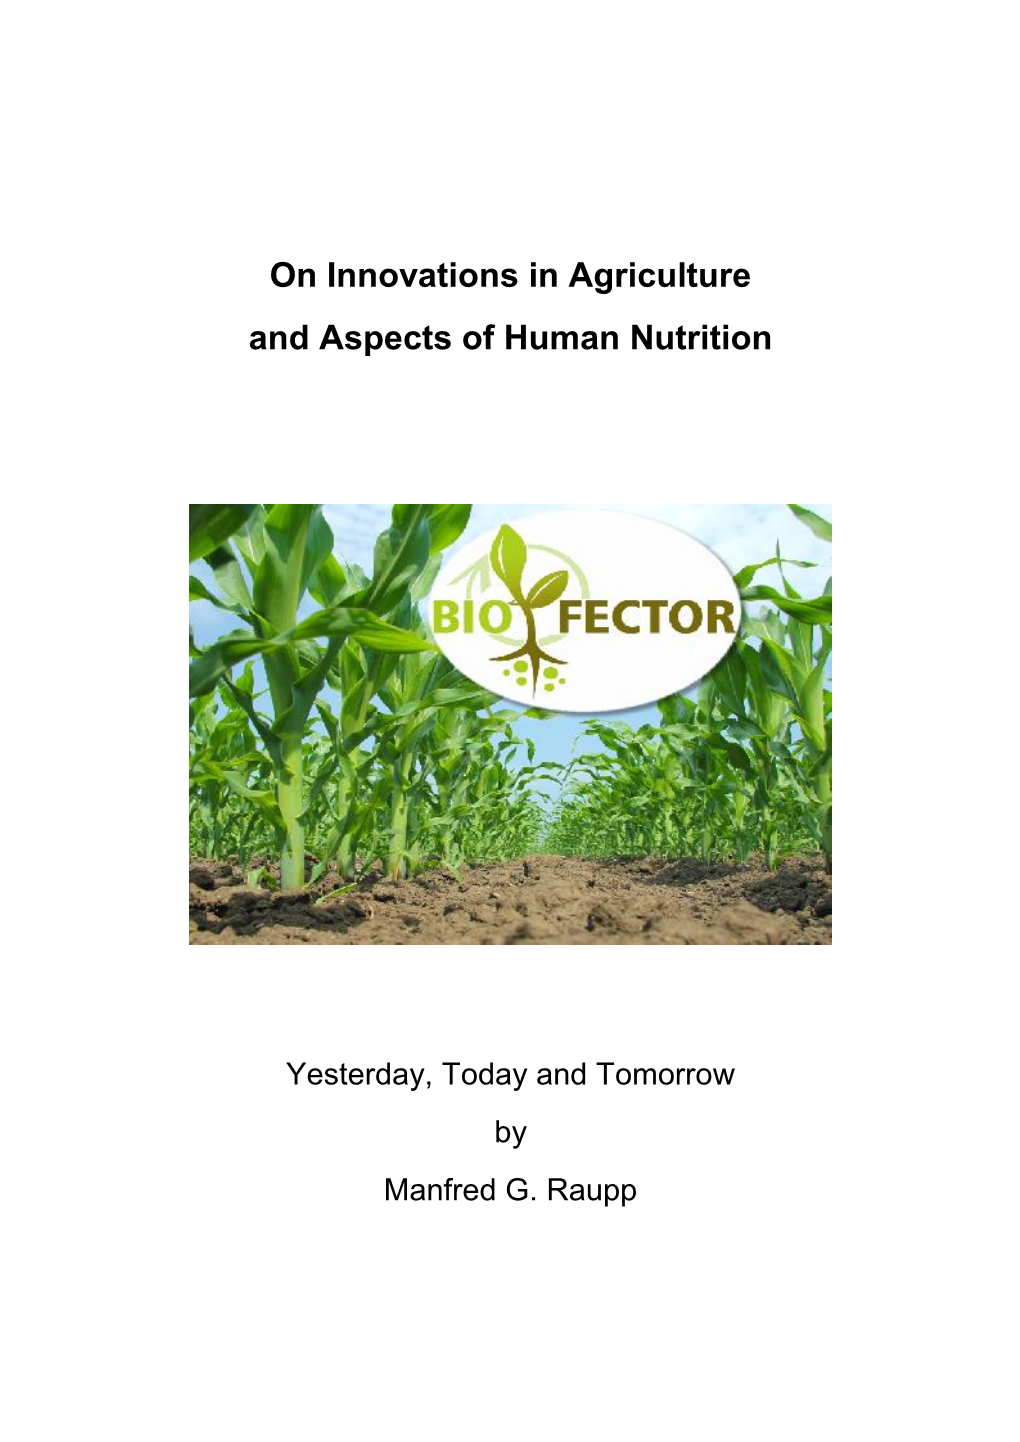 On Innovations in Agriculture and Aspects of Human Nutrition